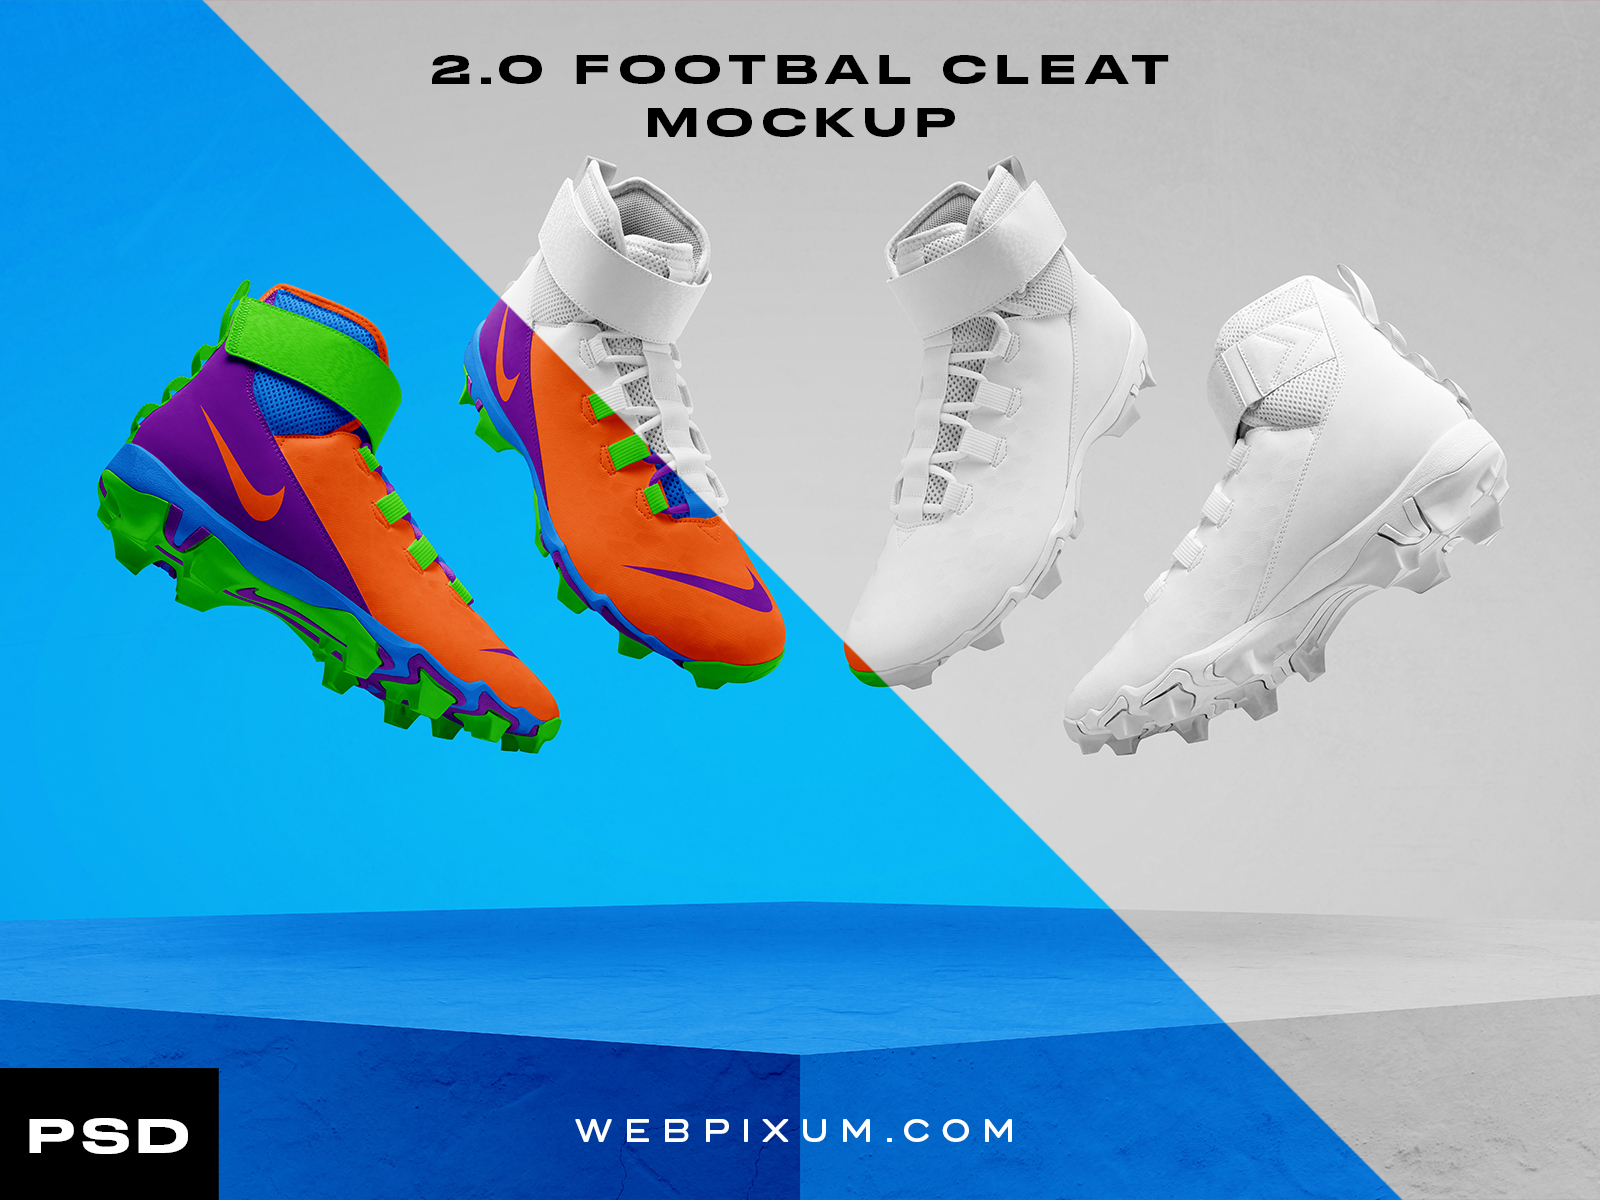 Download 2.0 Football Cleat Mockup by Brandon Williams on Dribbble